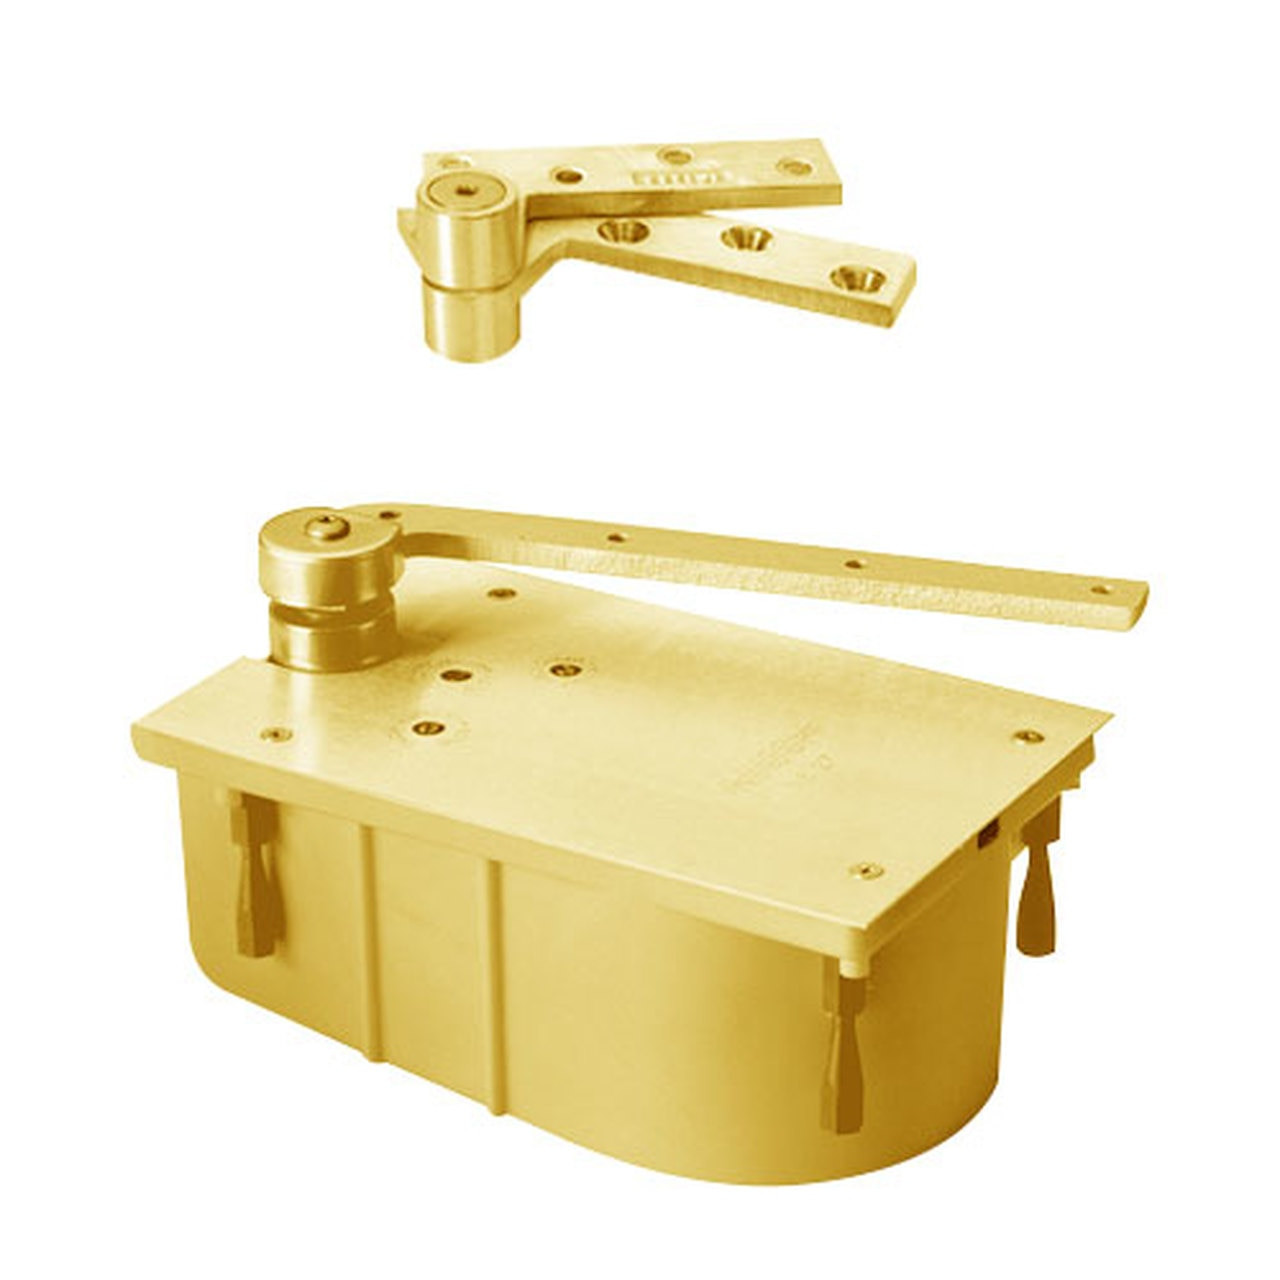 SCF127-85N-RH-605 Rixson 27 Series Fire Rated Heavy Duty 3/4" Offset Hung Floor Closer in Bright Brass Finish